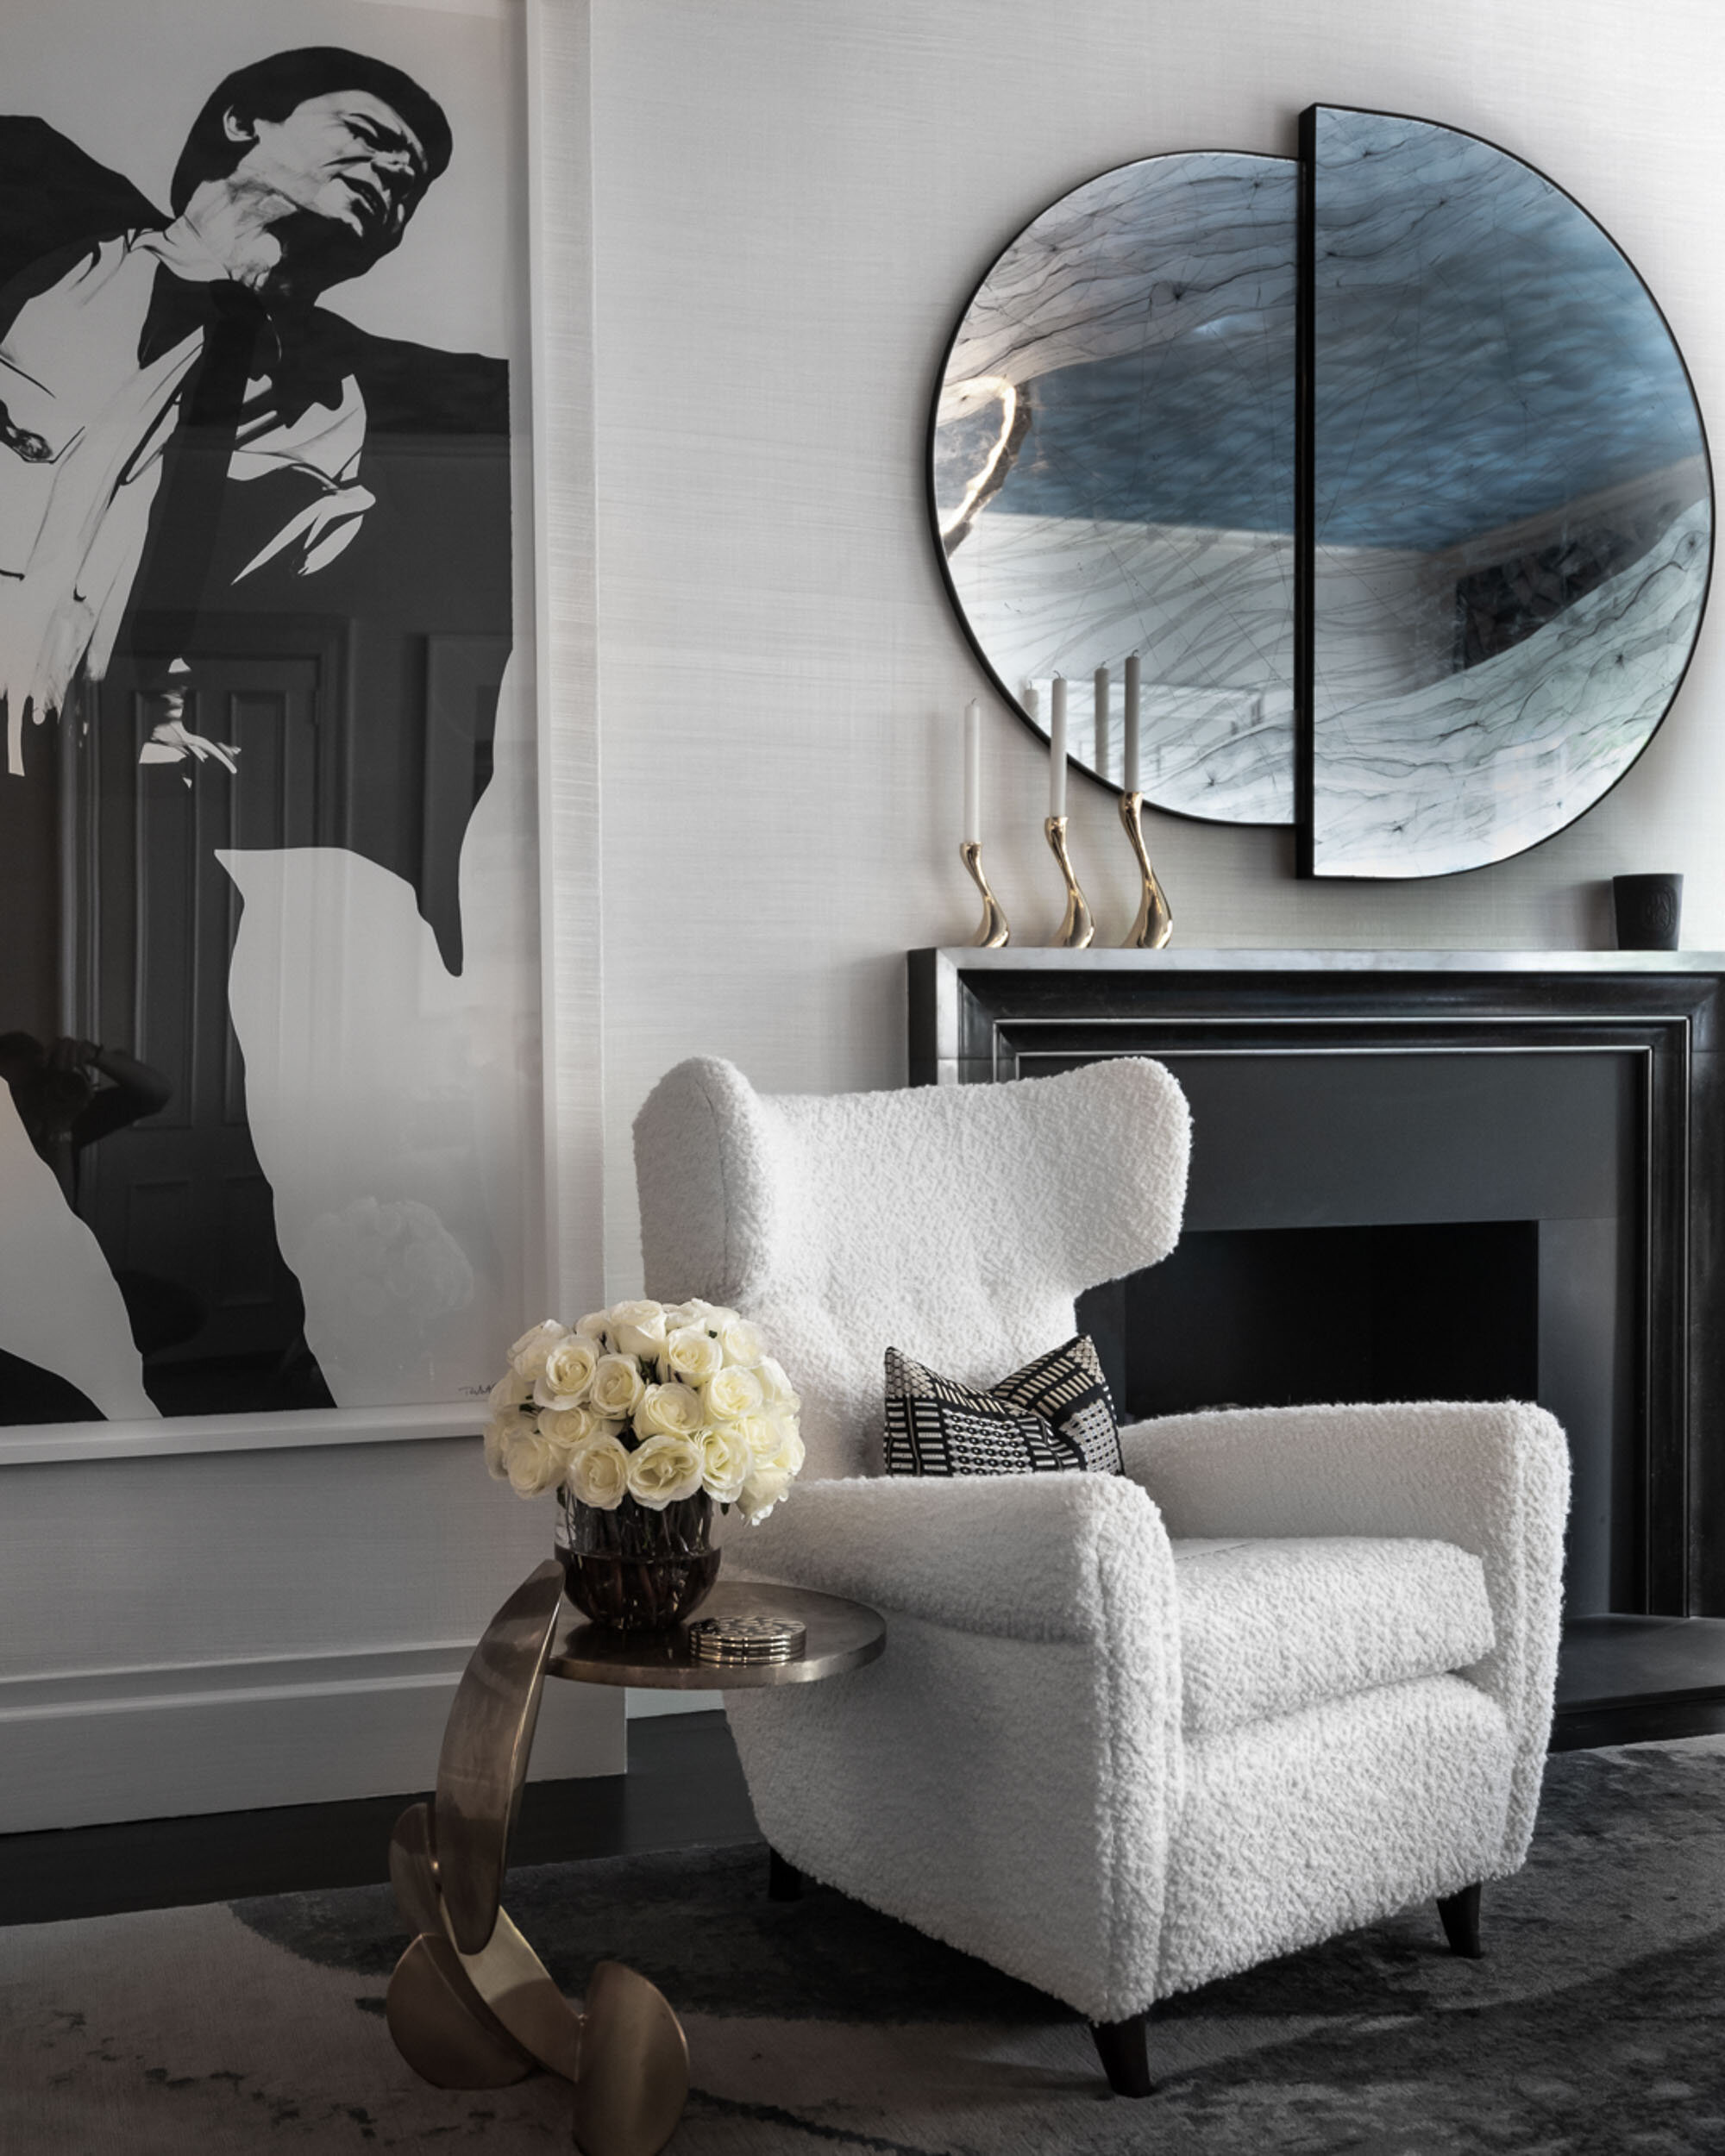  #bradsteinphoto, Highlights from the #kipsbayshowhouse19 In @jcohlermasondesign sitting room, an eglomise mirror hangs over a fireplace facing a trio of Ghirò Studio tables and a Todd Merrill Studio channel-tufted Racetrack sofa. A work by Robert Lo